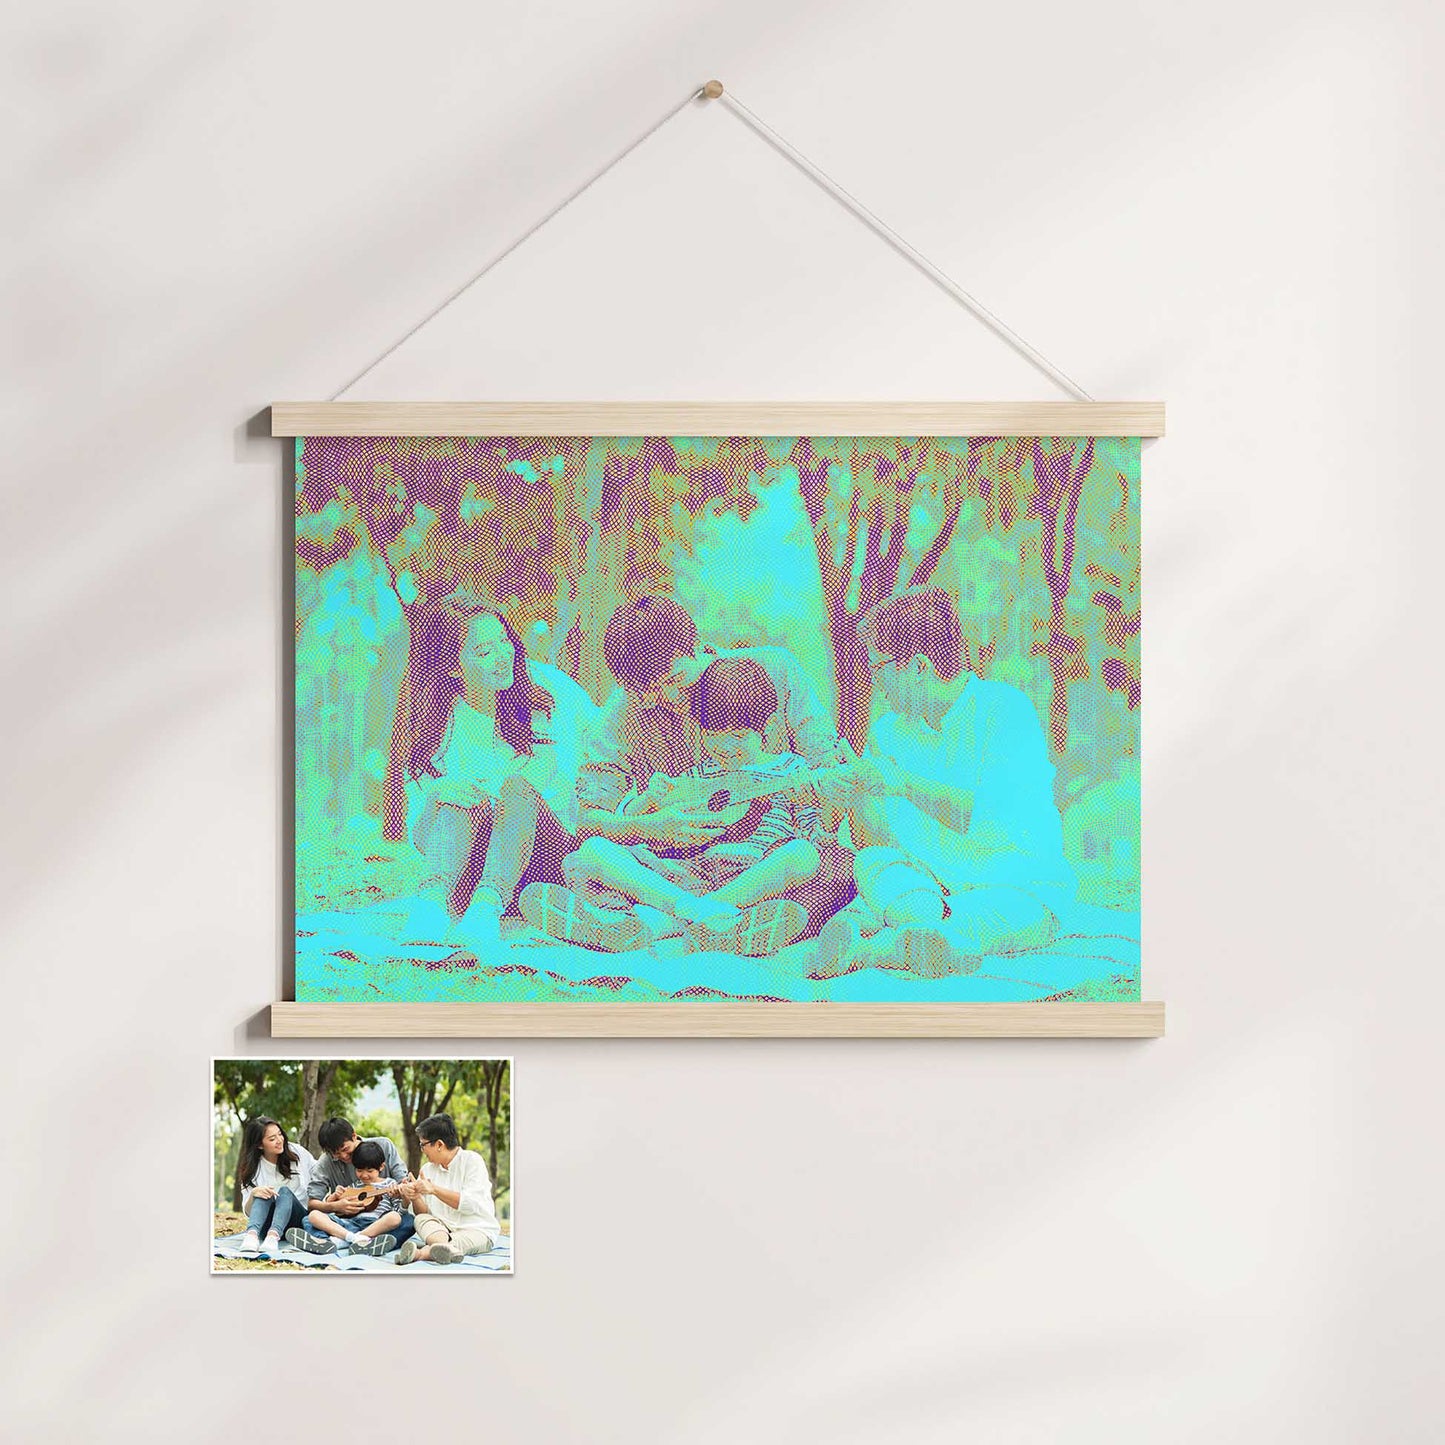 Immerse yourself in the beauty of our Personalised Blue Engraved Poster Hanger. Printed from your photo, it showcases a mesmerizing engraved effect with vibrant blue and purple hues. This creative and artistic design brings a cool and happy vibes